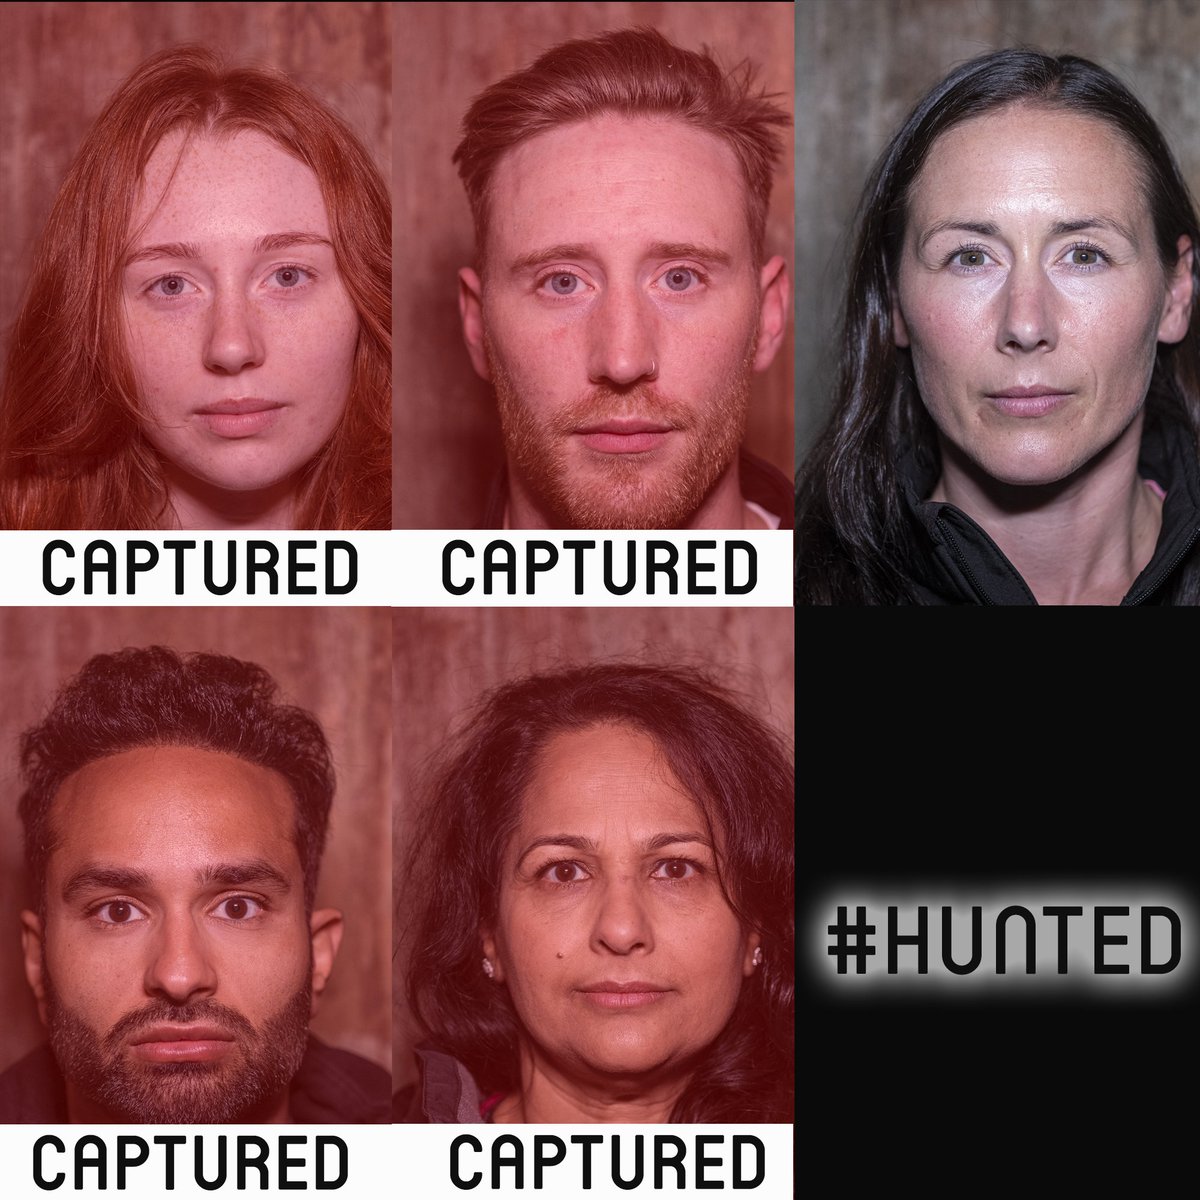 6 down, 5 more to go! Who do you reckon has what it takes to go all the way? #Hunted continues Sunday 9pm @Channel4 & catch up now on @All4